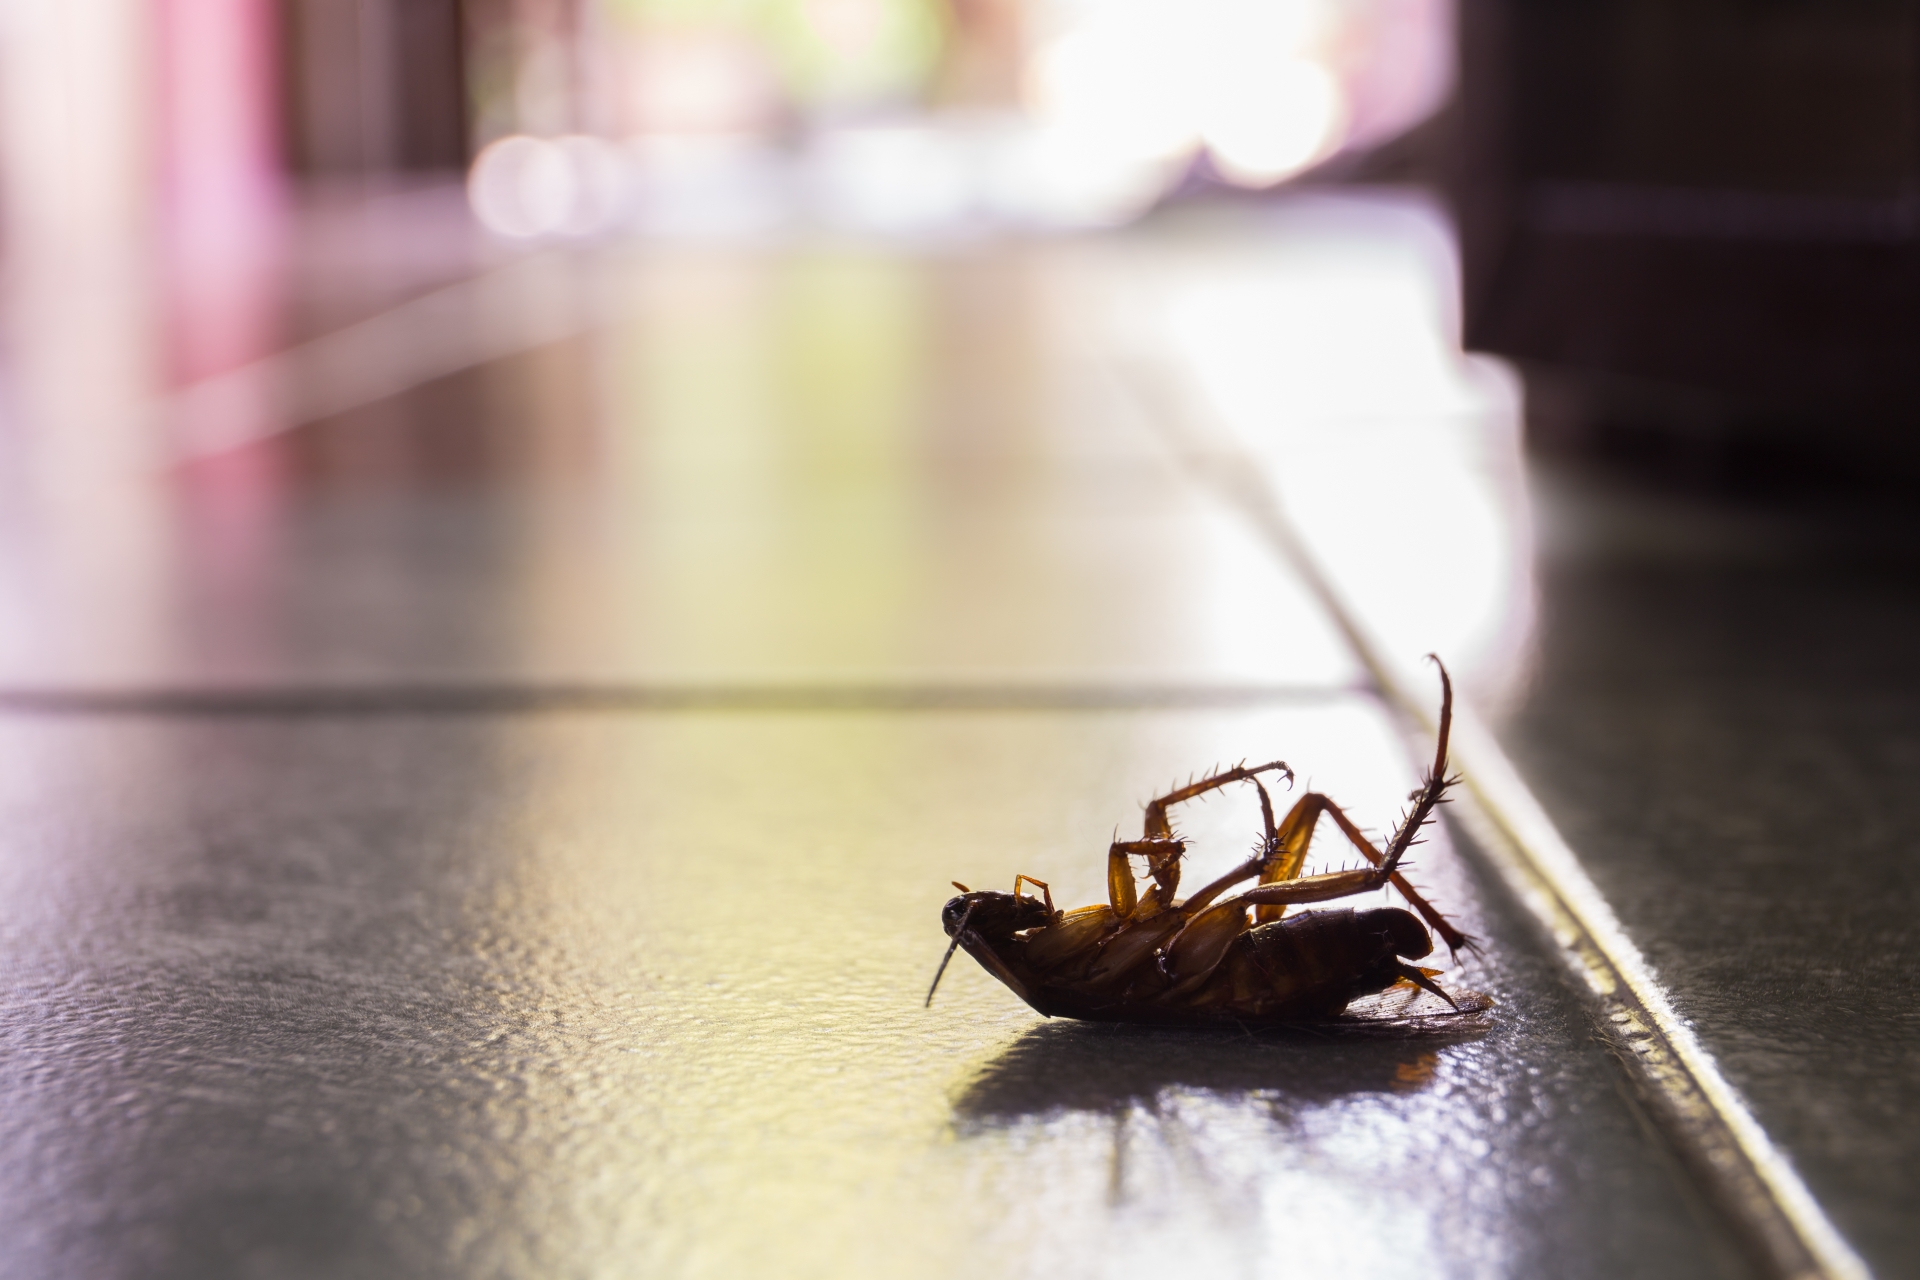 Cockroach Control, Pest Control in Muswell Hill, N10. Call Now 020 8166 9746